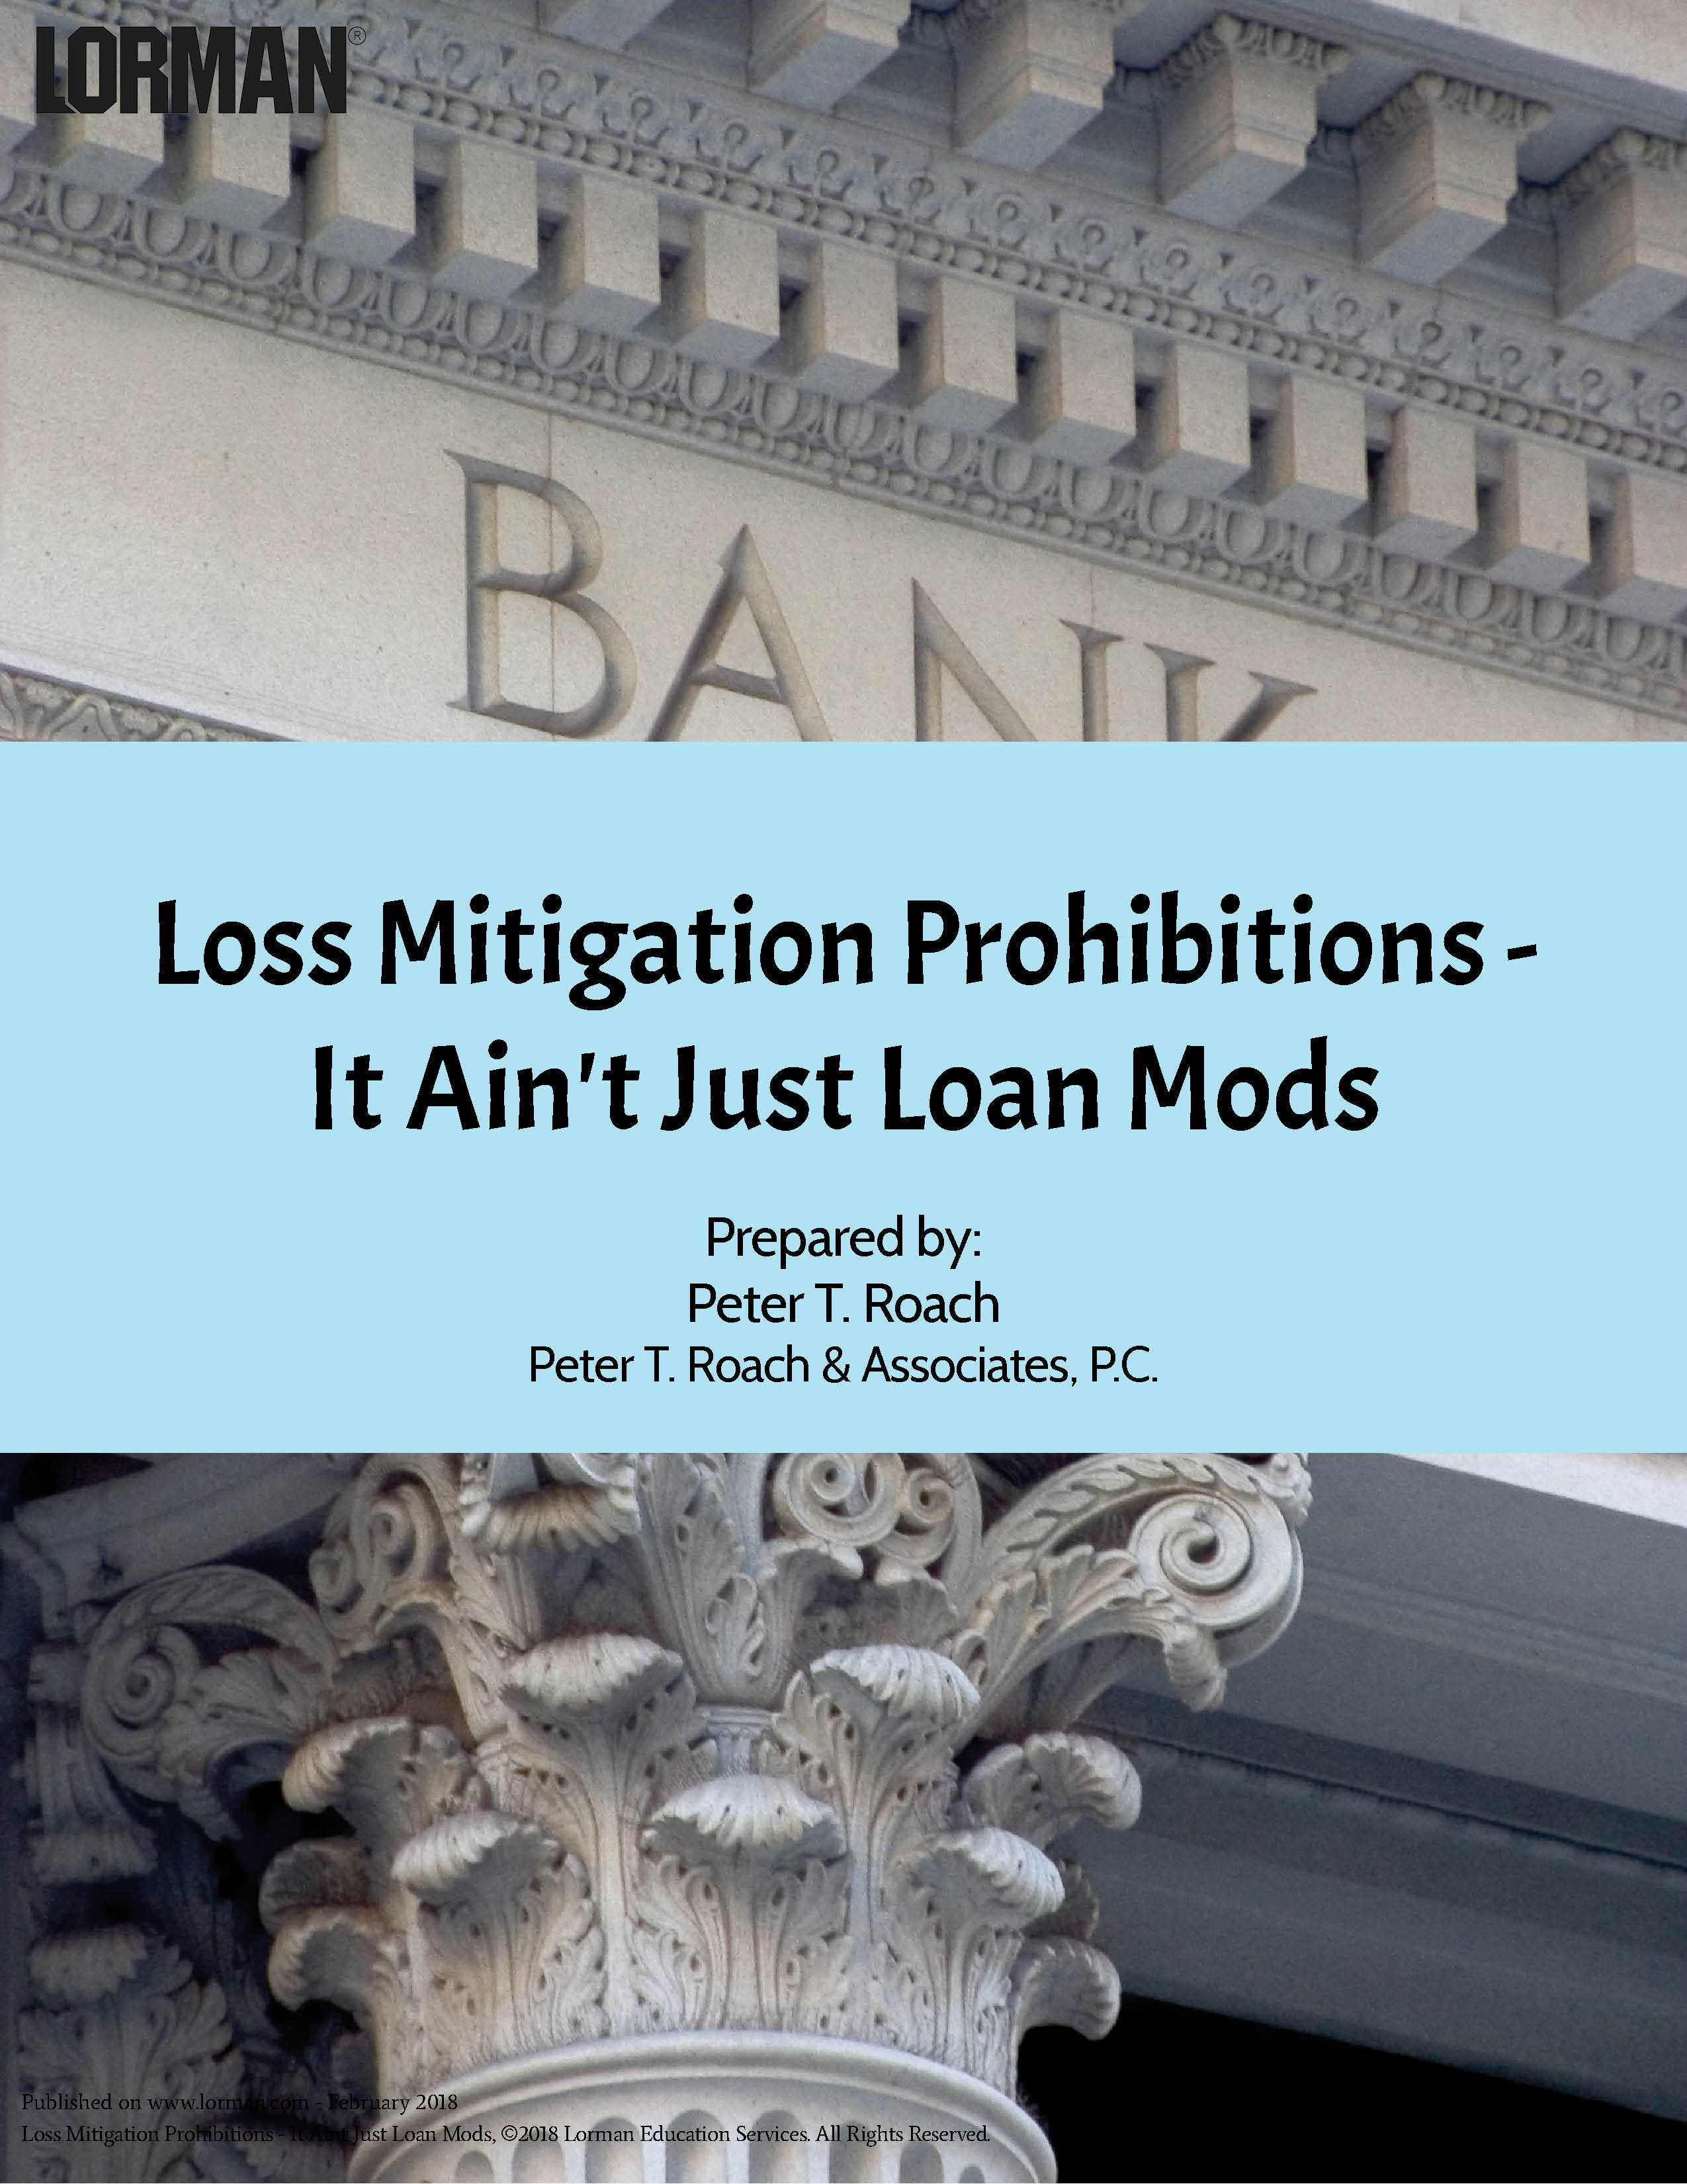 Loss Mitigation Prohibitions - It Ain't Just Loan Mods